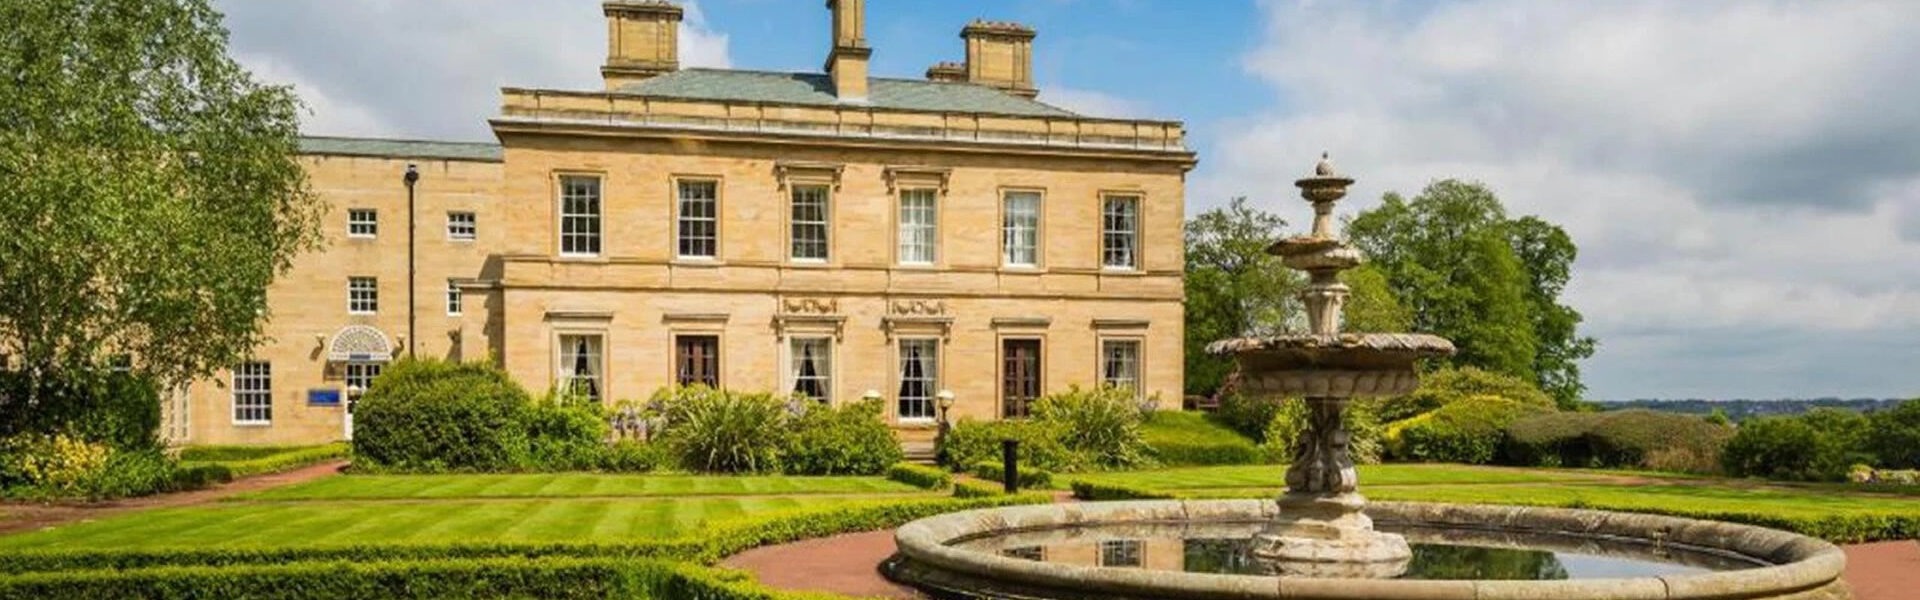 Oulton Hall, West Yorkshire